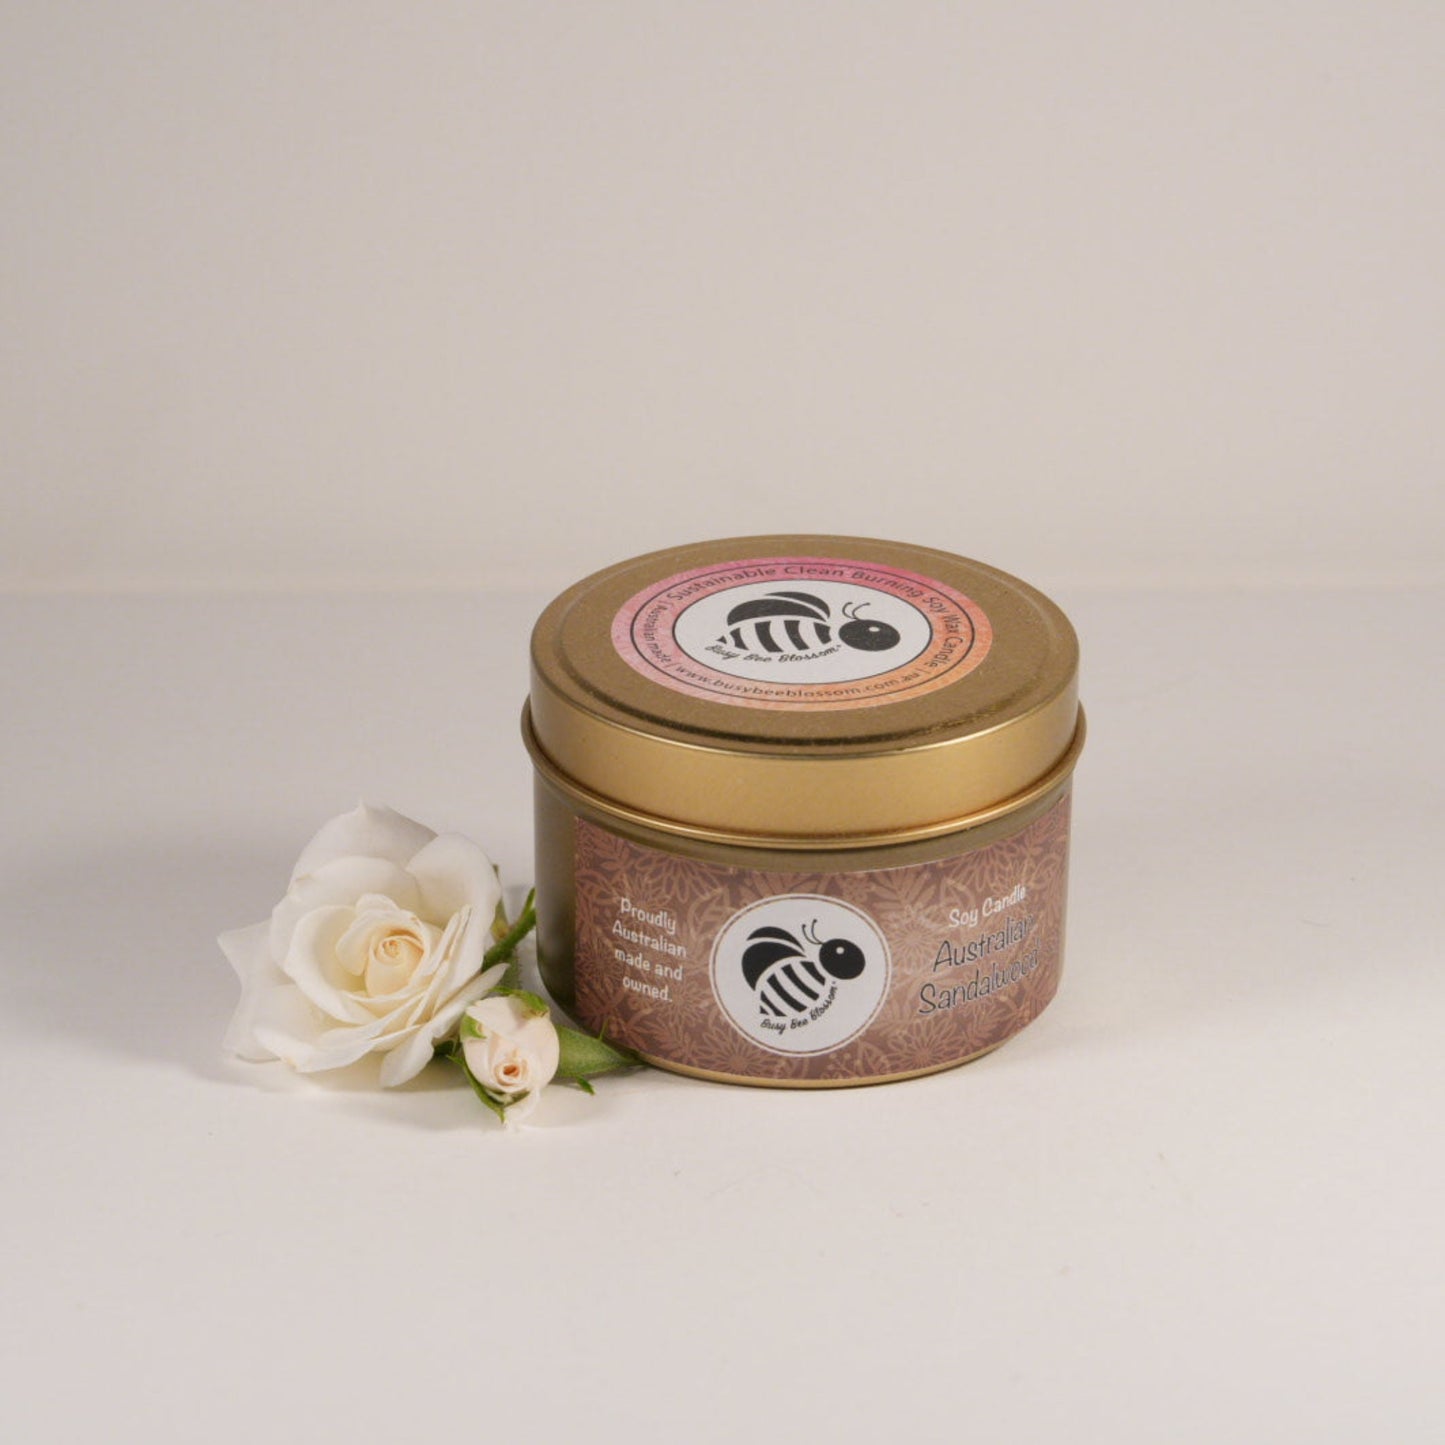 Australian Sandalwood Gold Travel Tin Soy Candle with roses